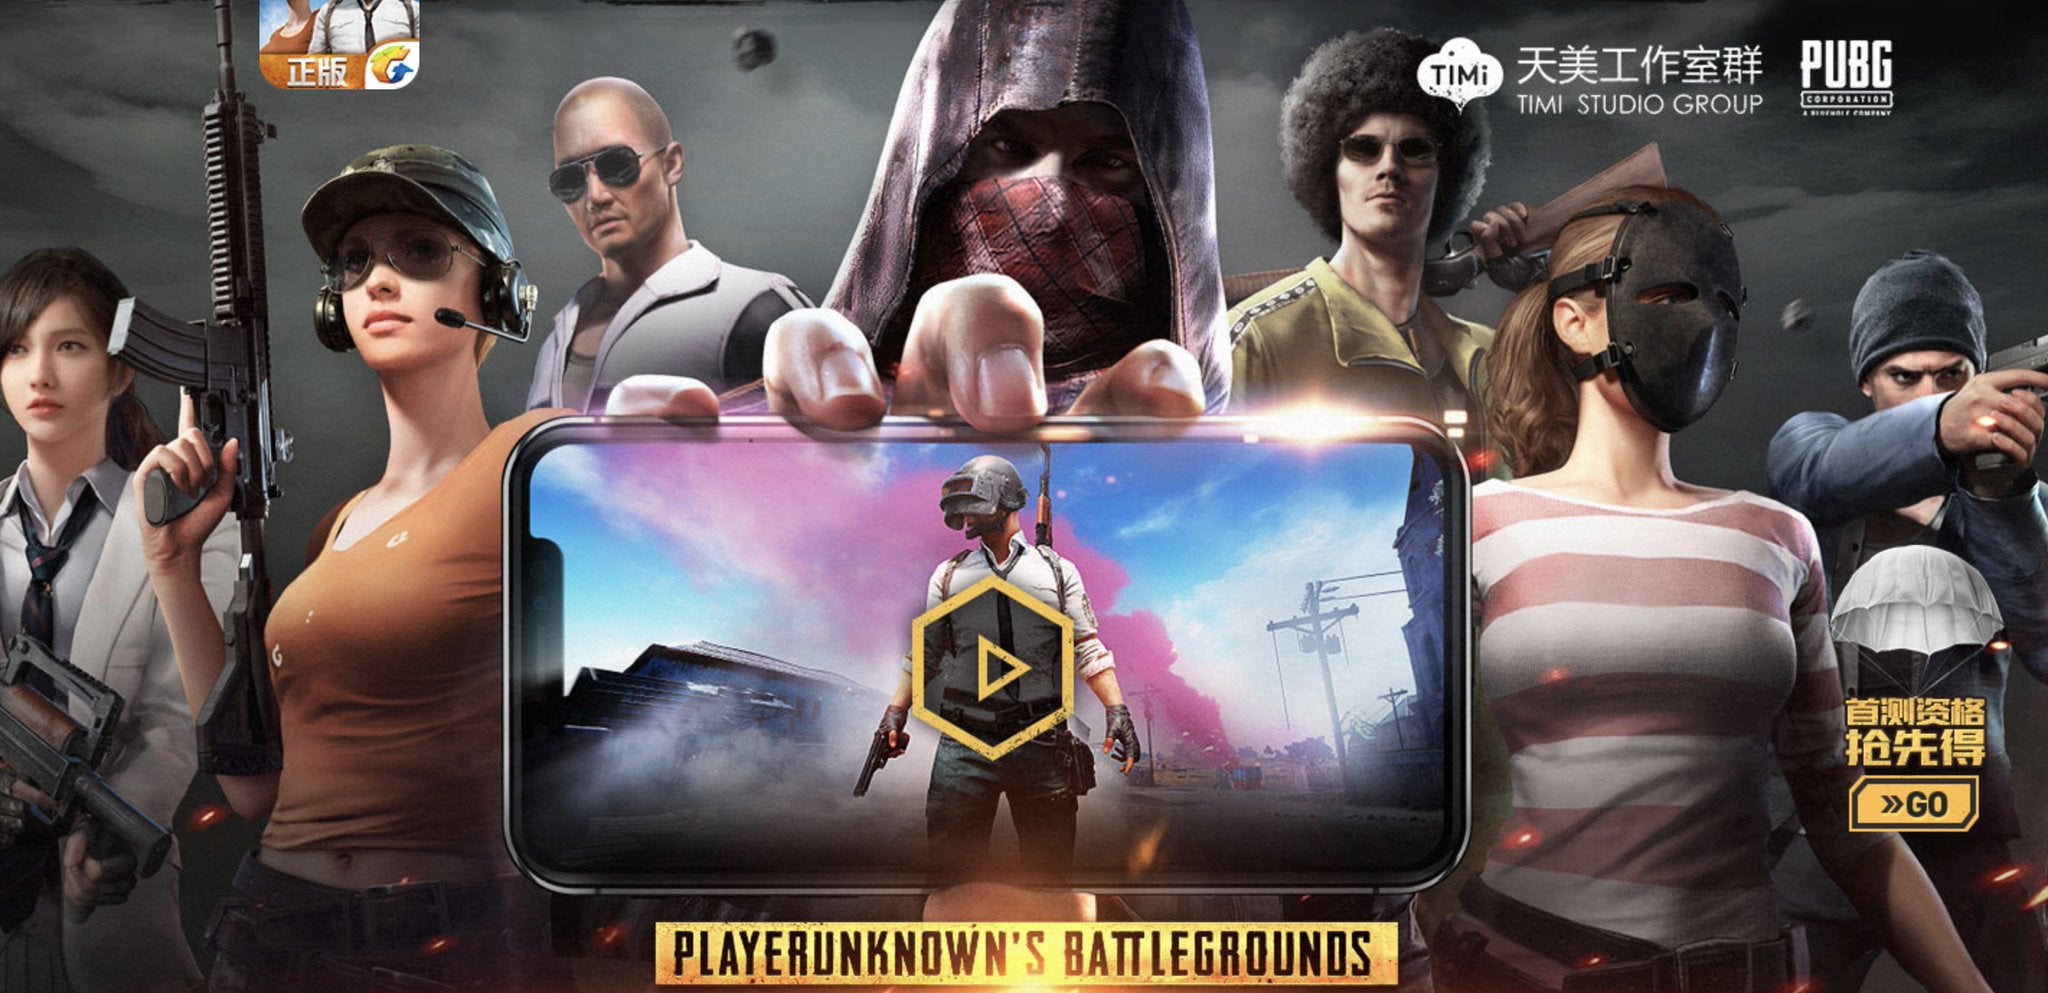 Image for Watch gameplay from the first Chinese PUBG mobile game